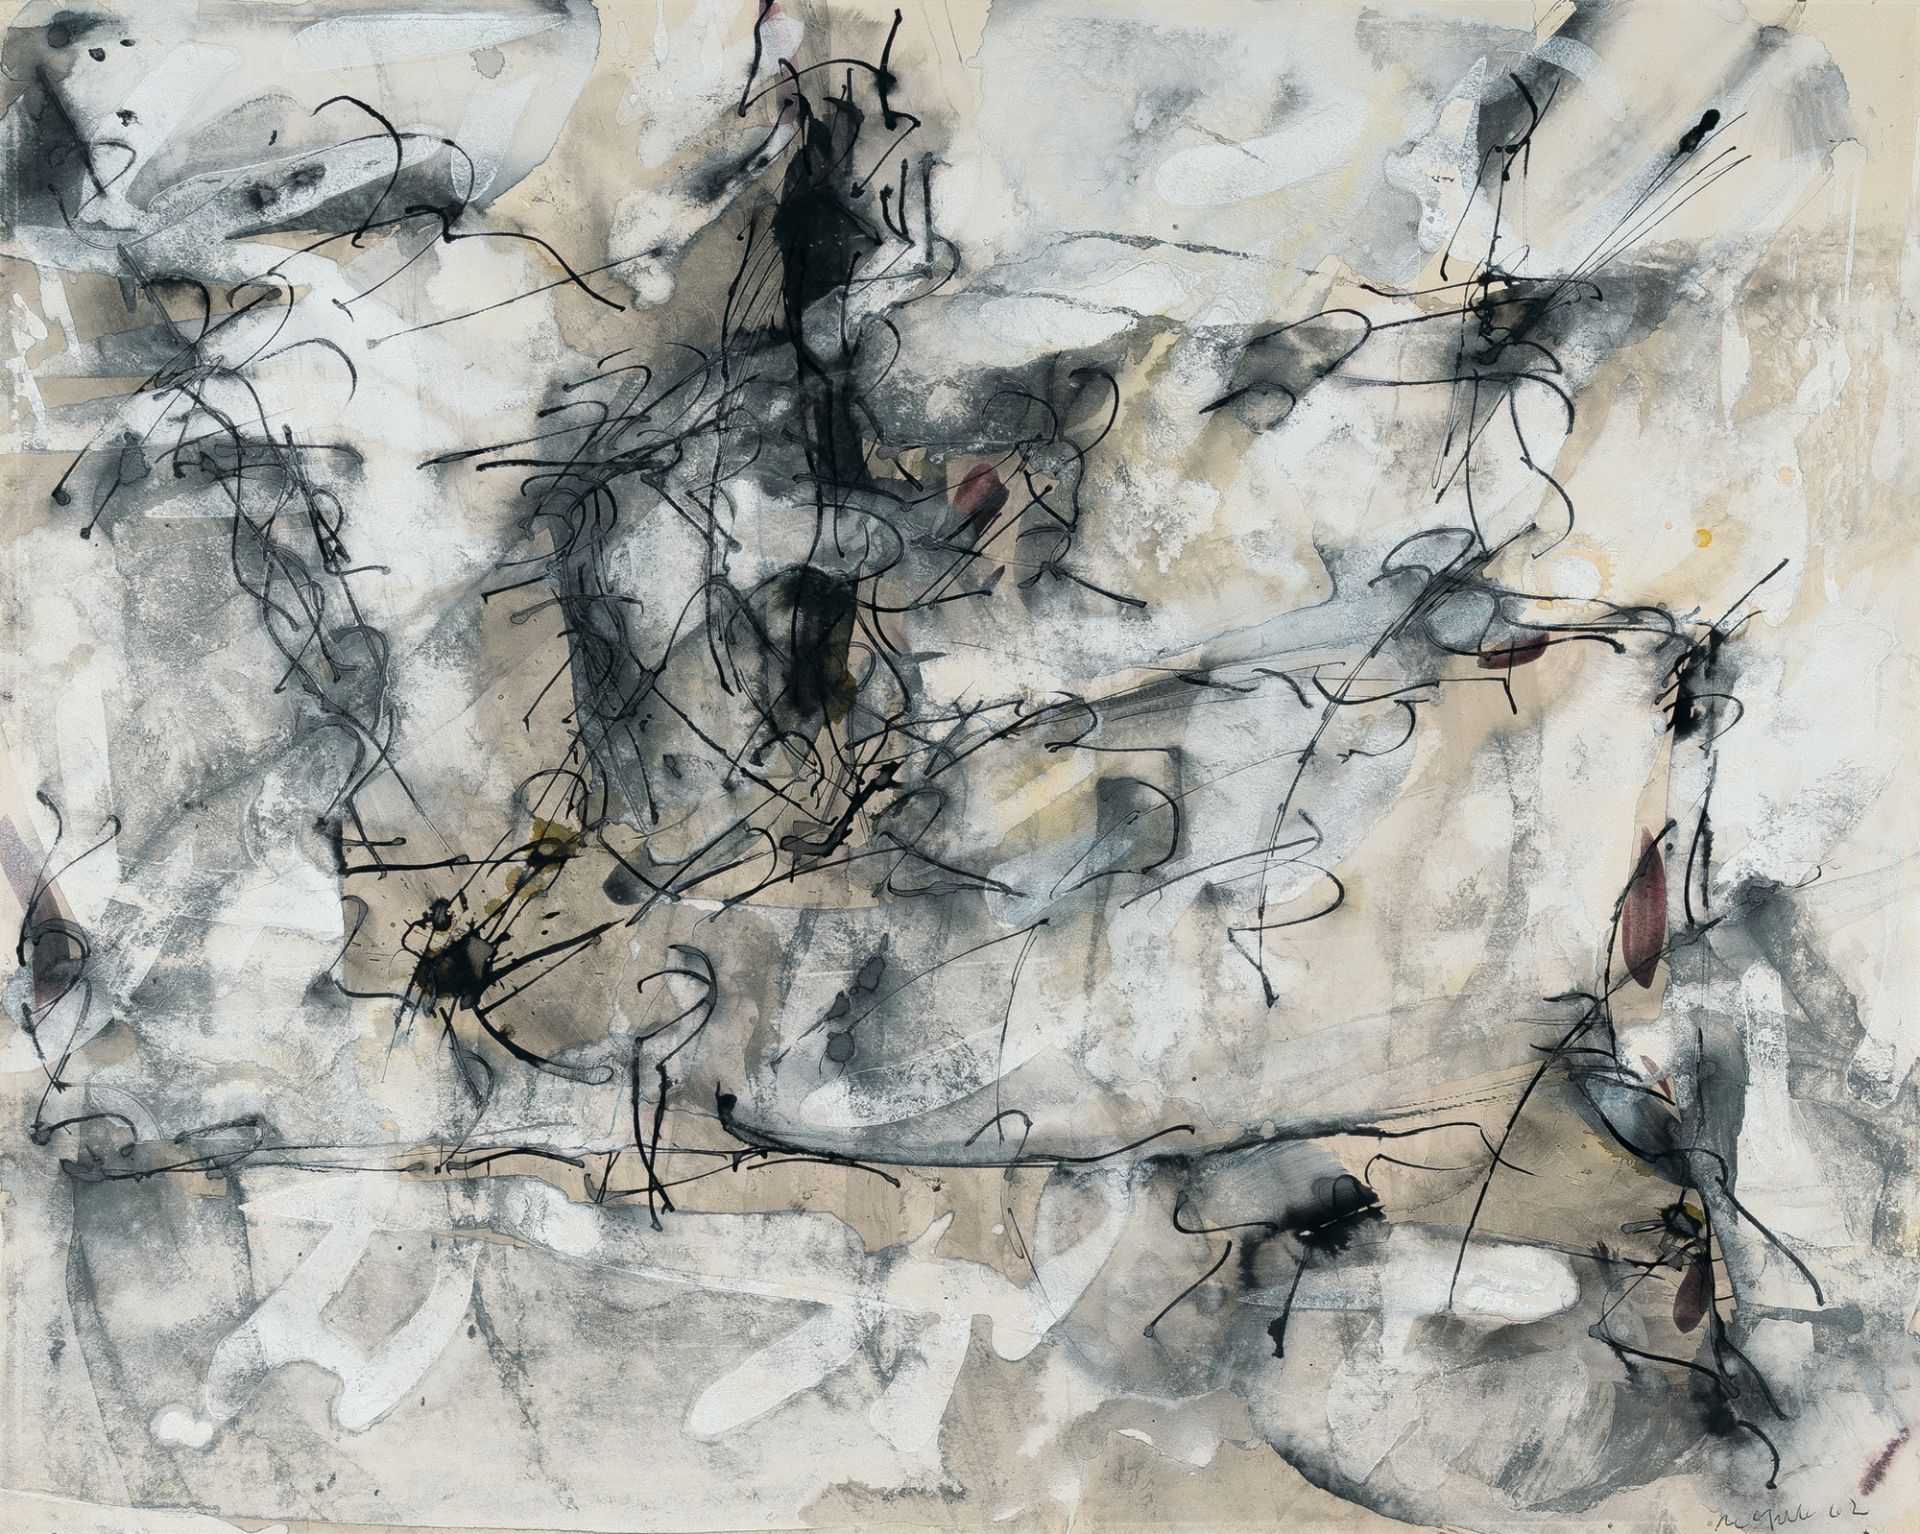 Jean-Paul Riopelle (1923 Montreal - L'Isle-aux-Grues 2002) – Ohne Titel (Untitled)